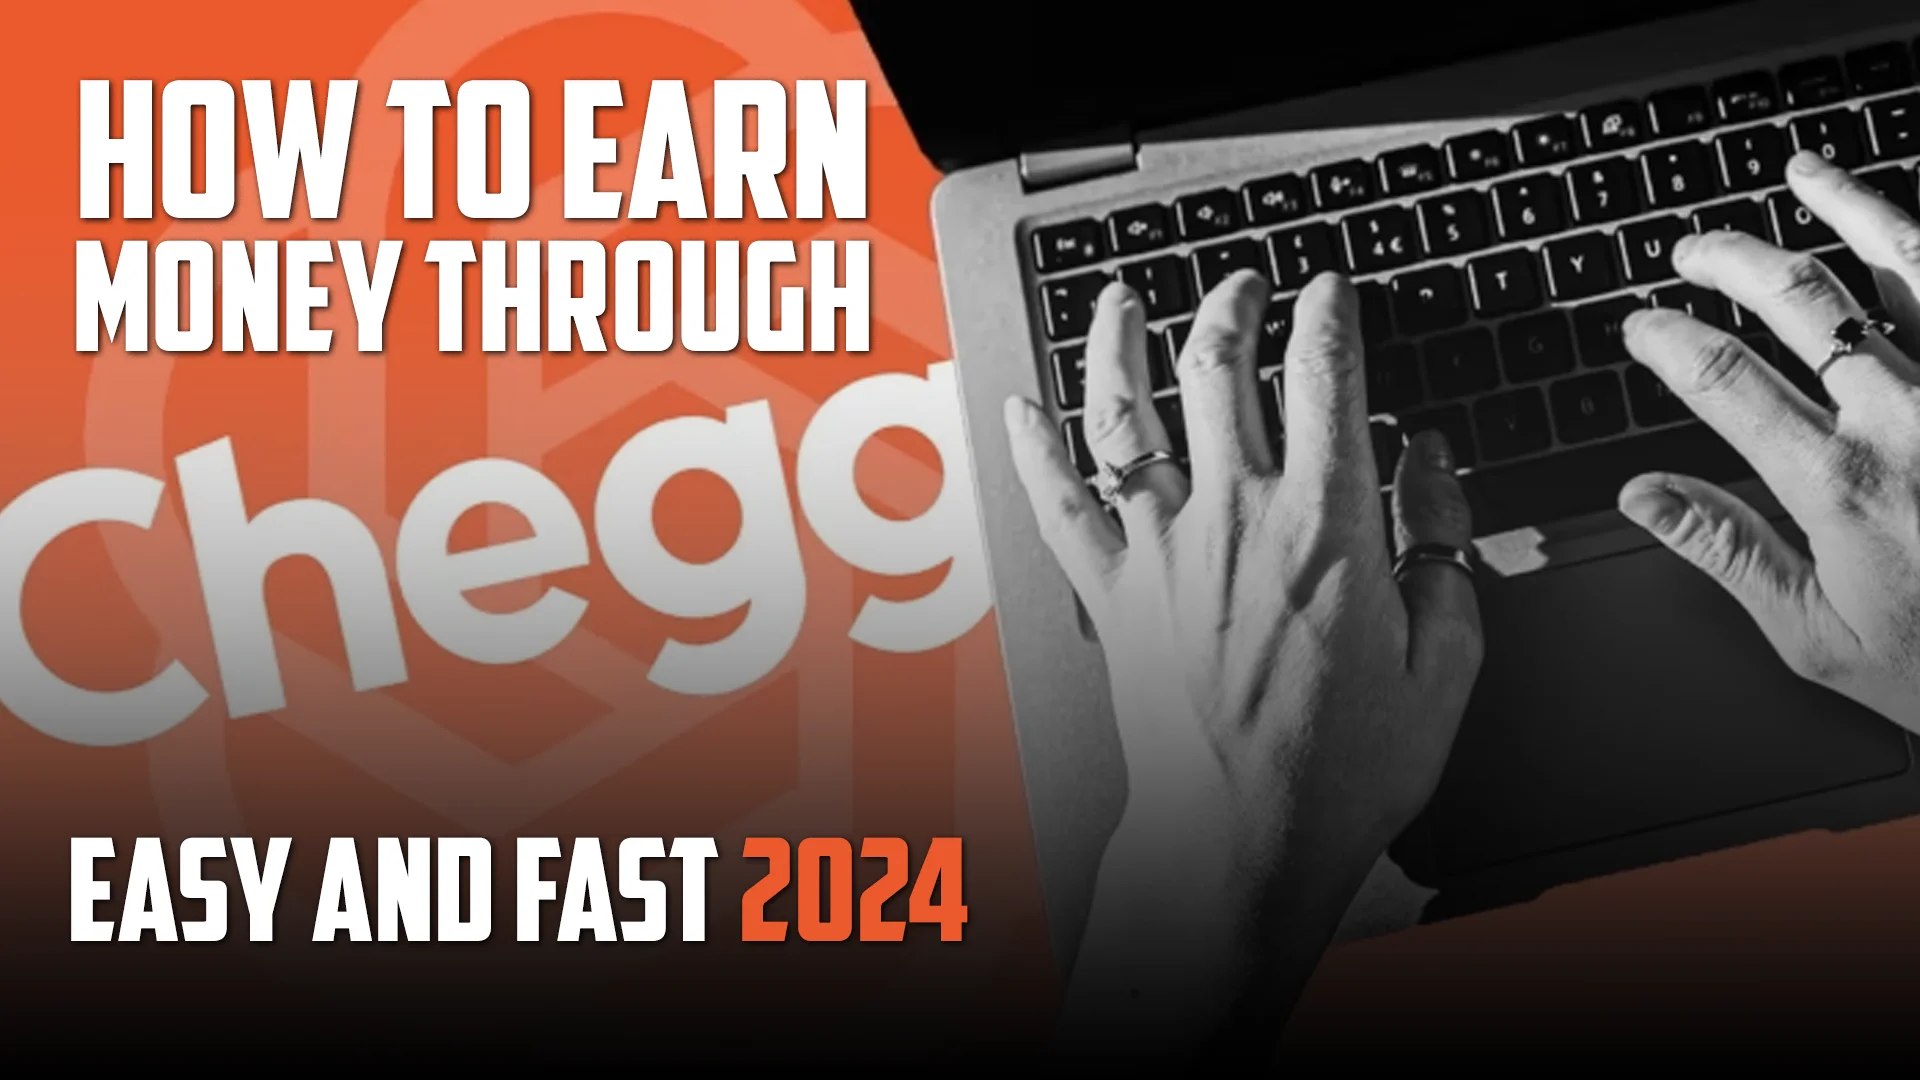 how to earn money with chegg 2024